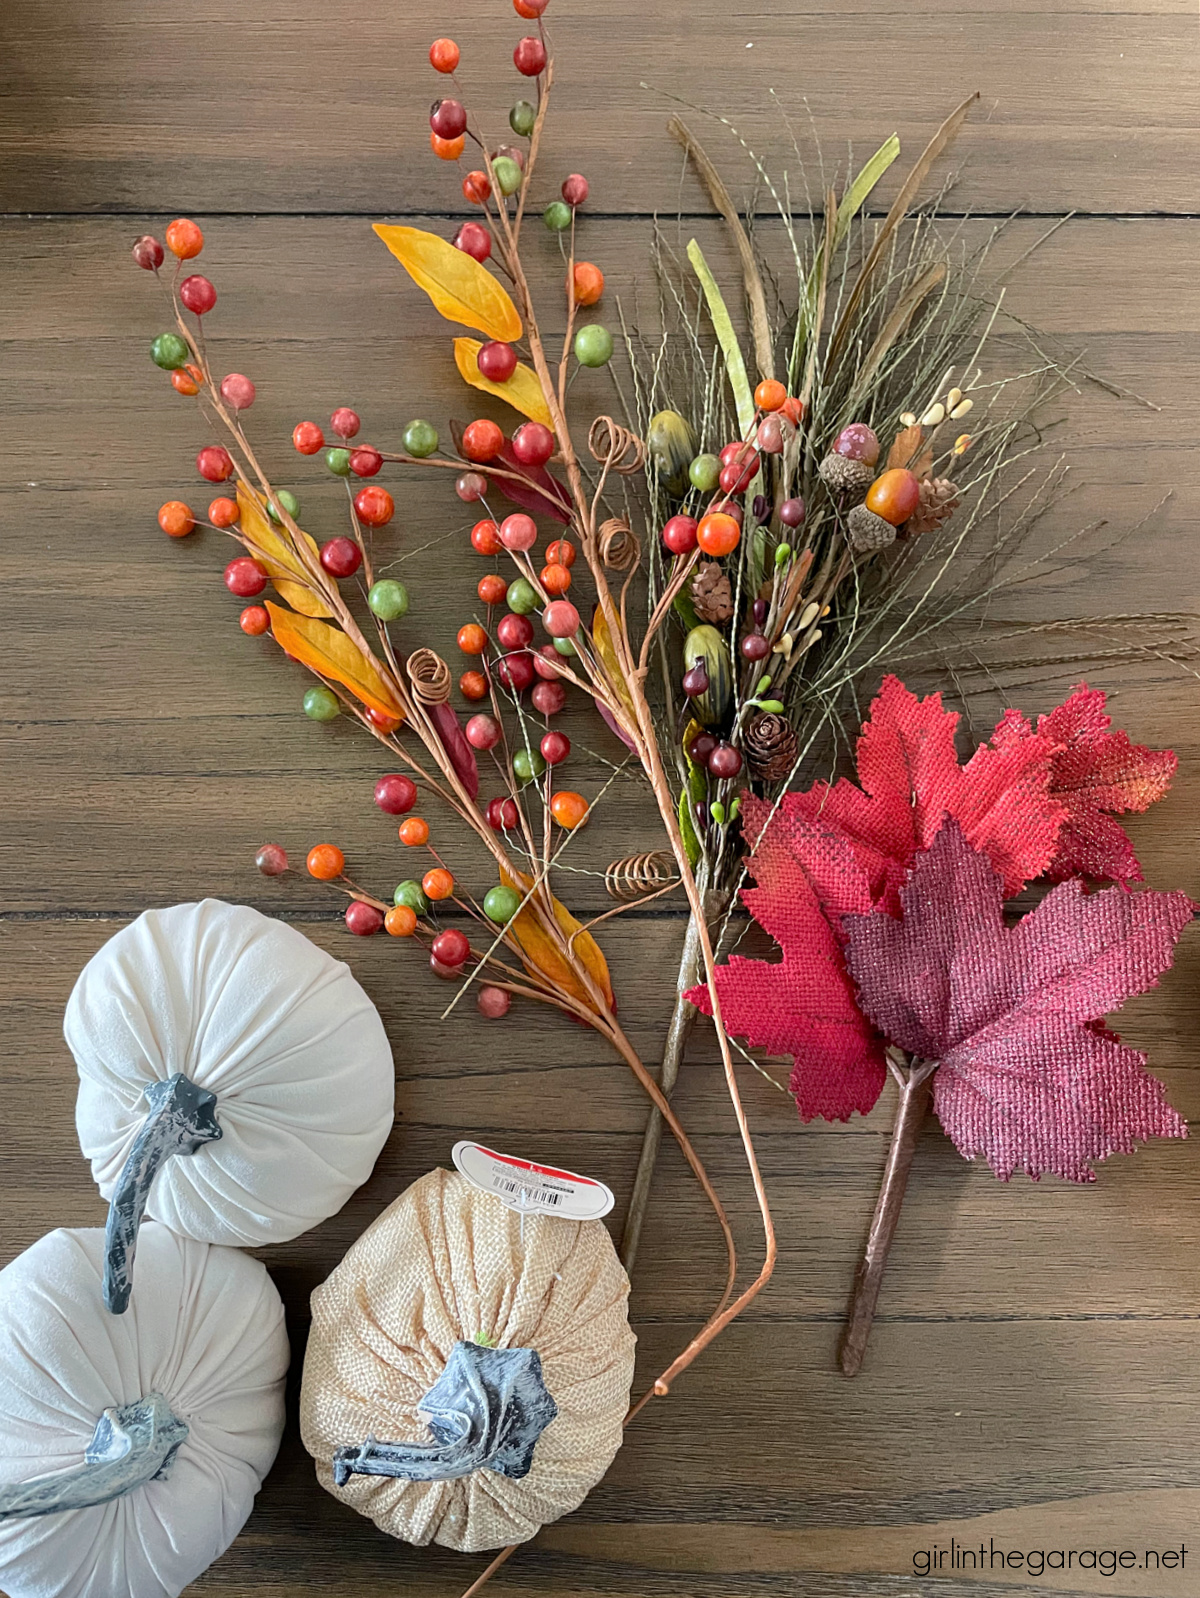 Festive fall basket ideas for decorating your mantel, home, and porch. Be inspired with these easy and gorgeous fall decorating ideas. By Girl in the Garage